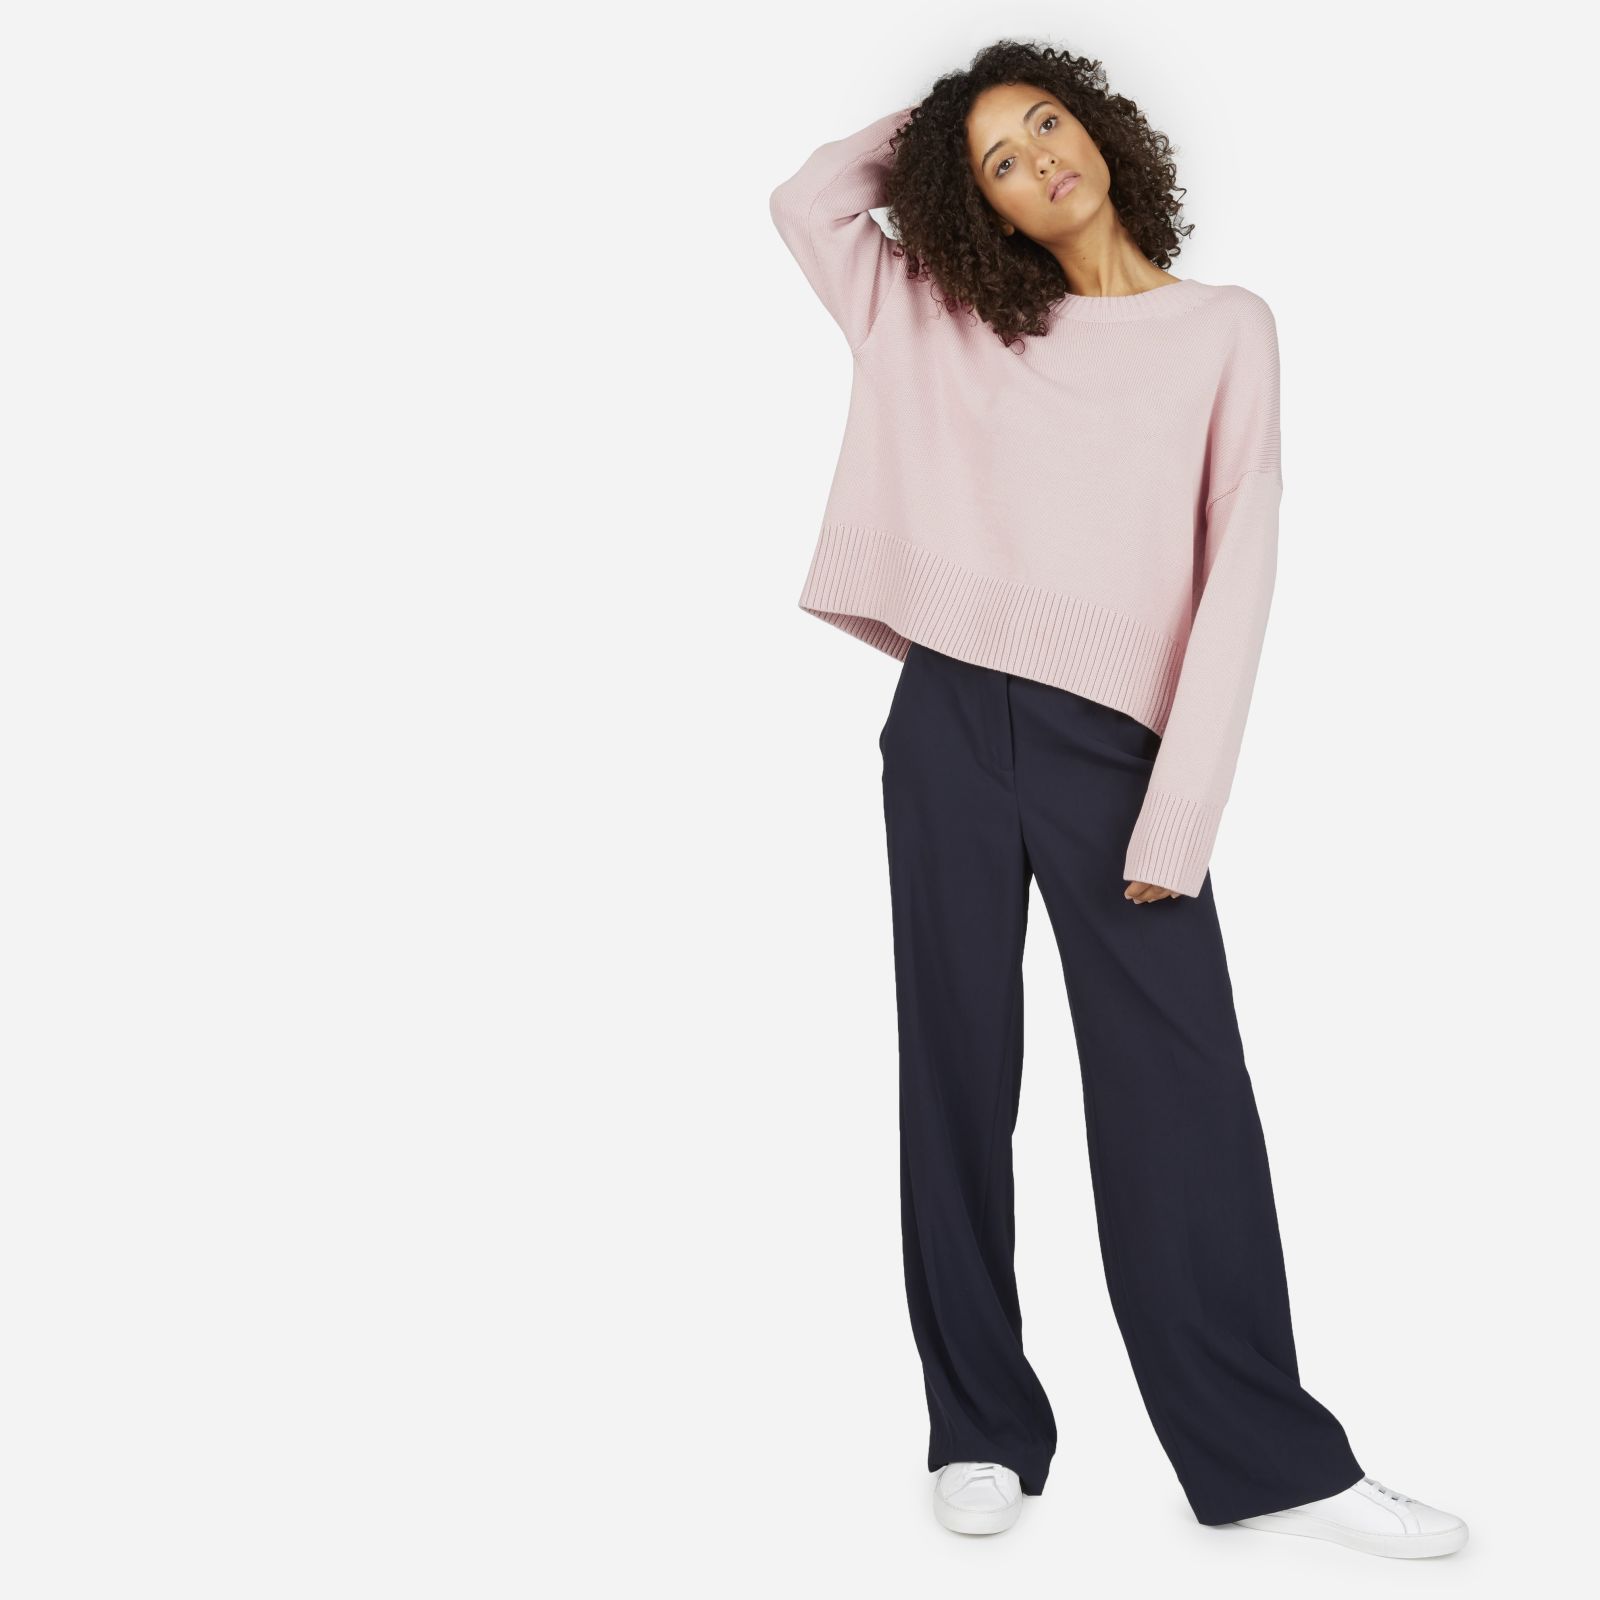 Women's Soft Cotton Square Crew Sweater by Everlane in Pale Pink, Size XXS | Everlane